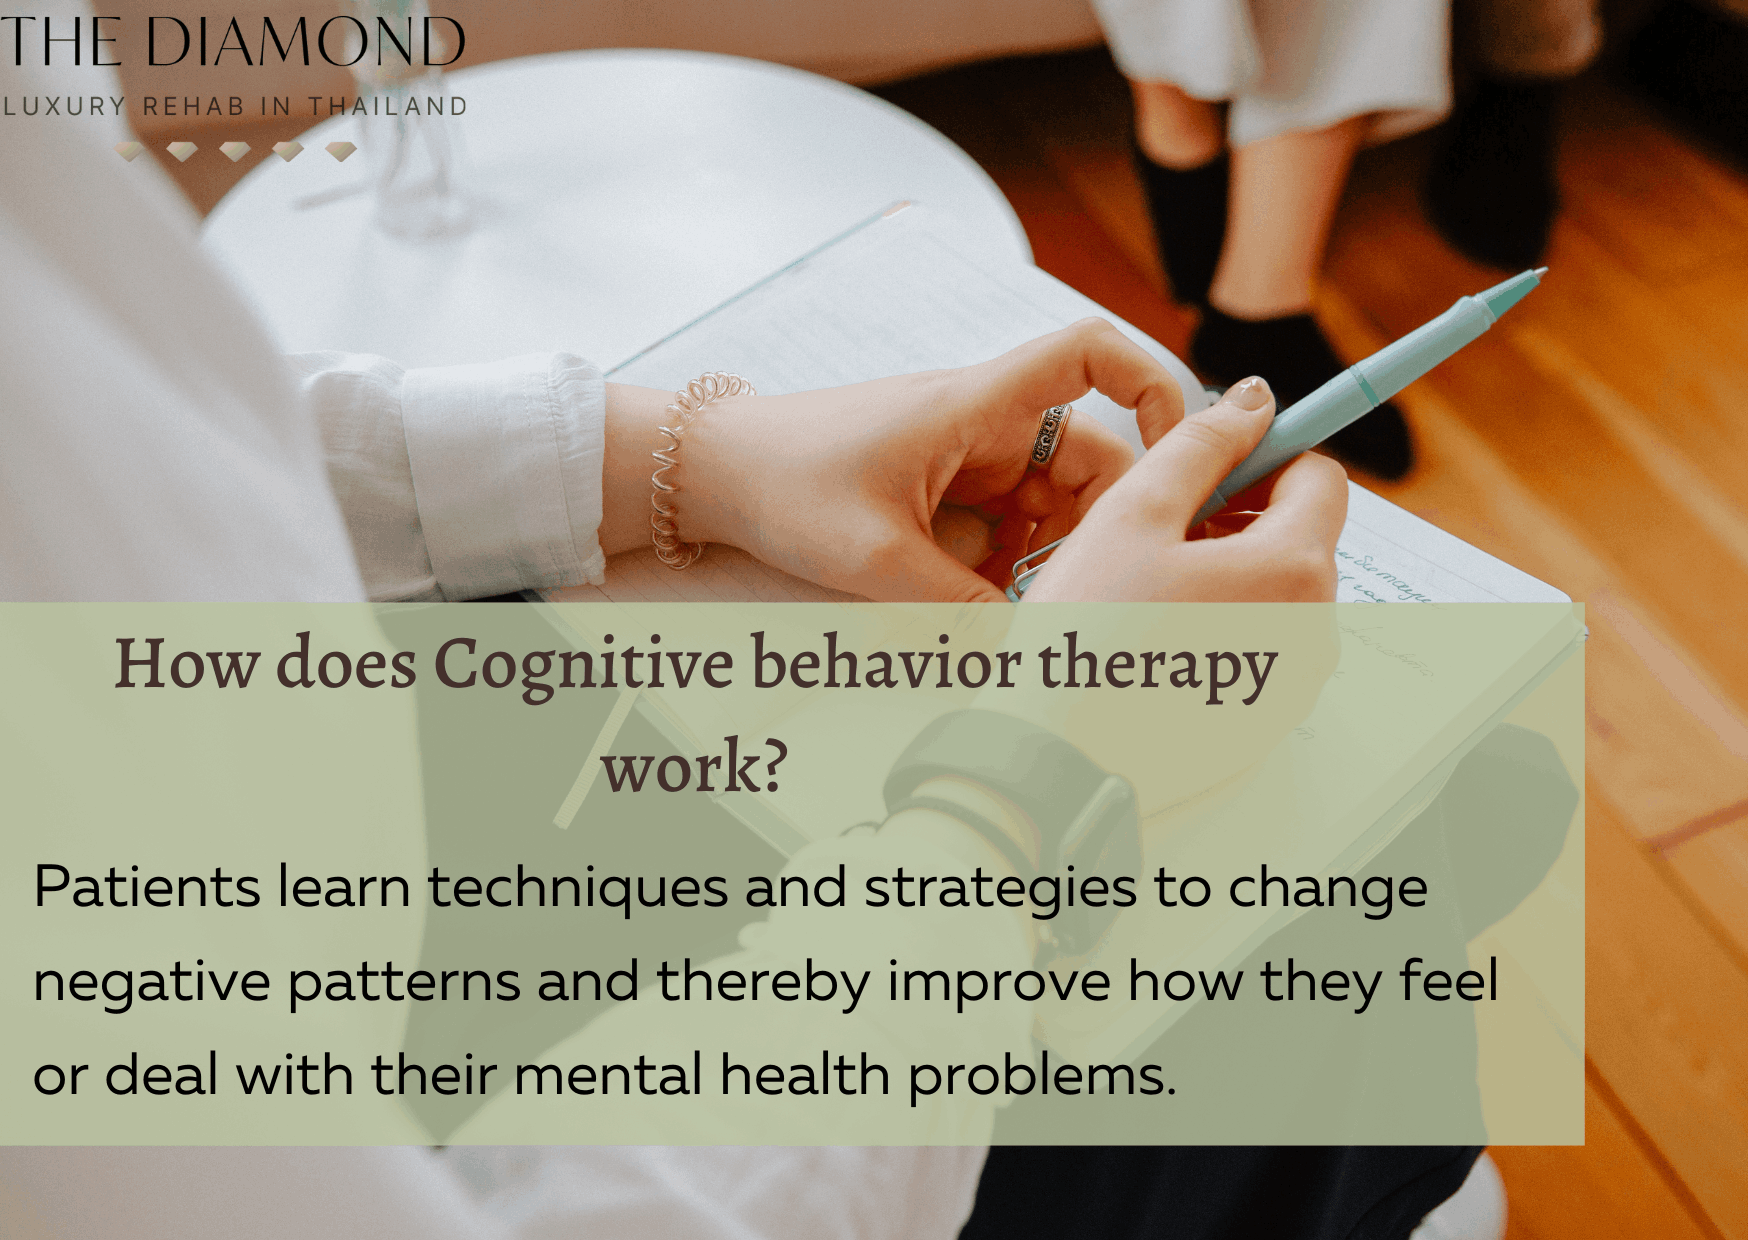 Cognitive behavior therapy work